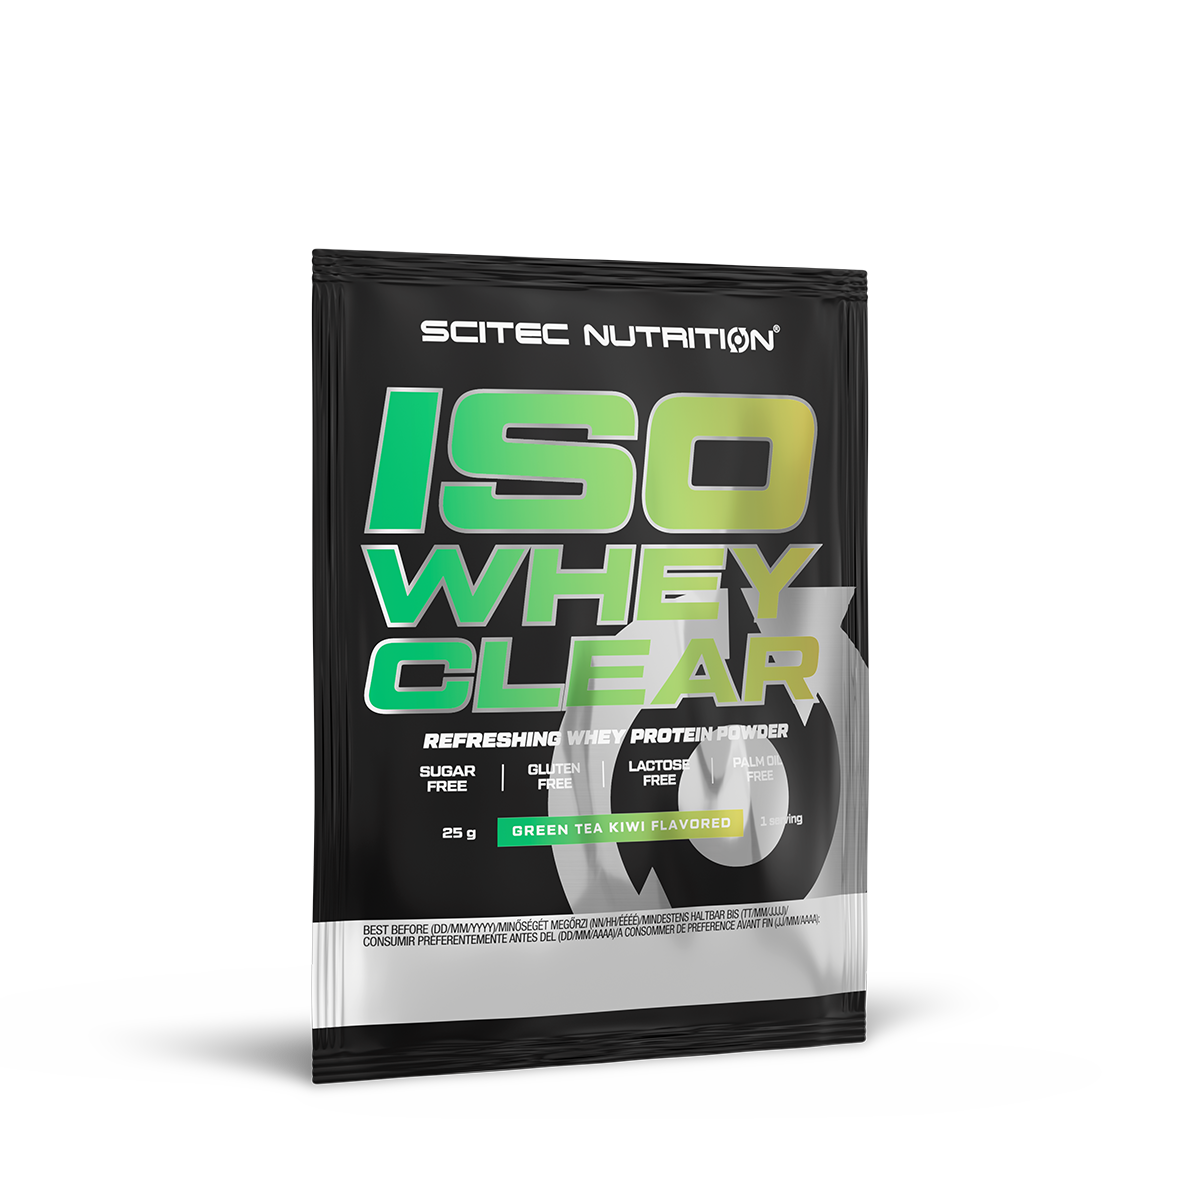 Scitec Nutrition Iso Whey Clear 25 gr.